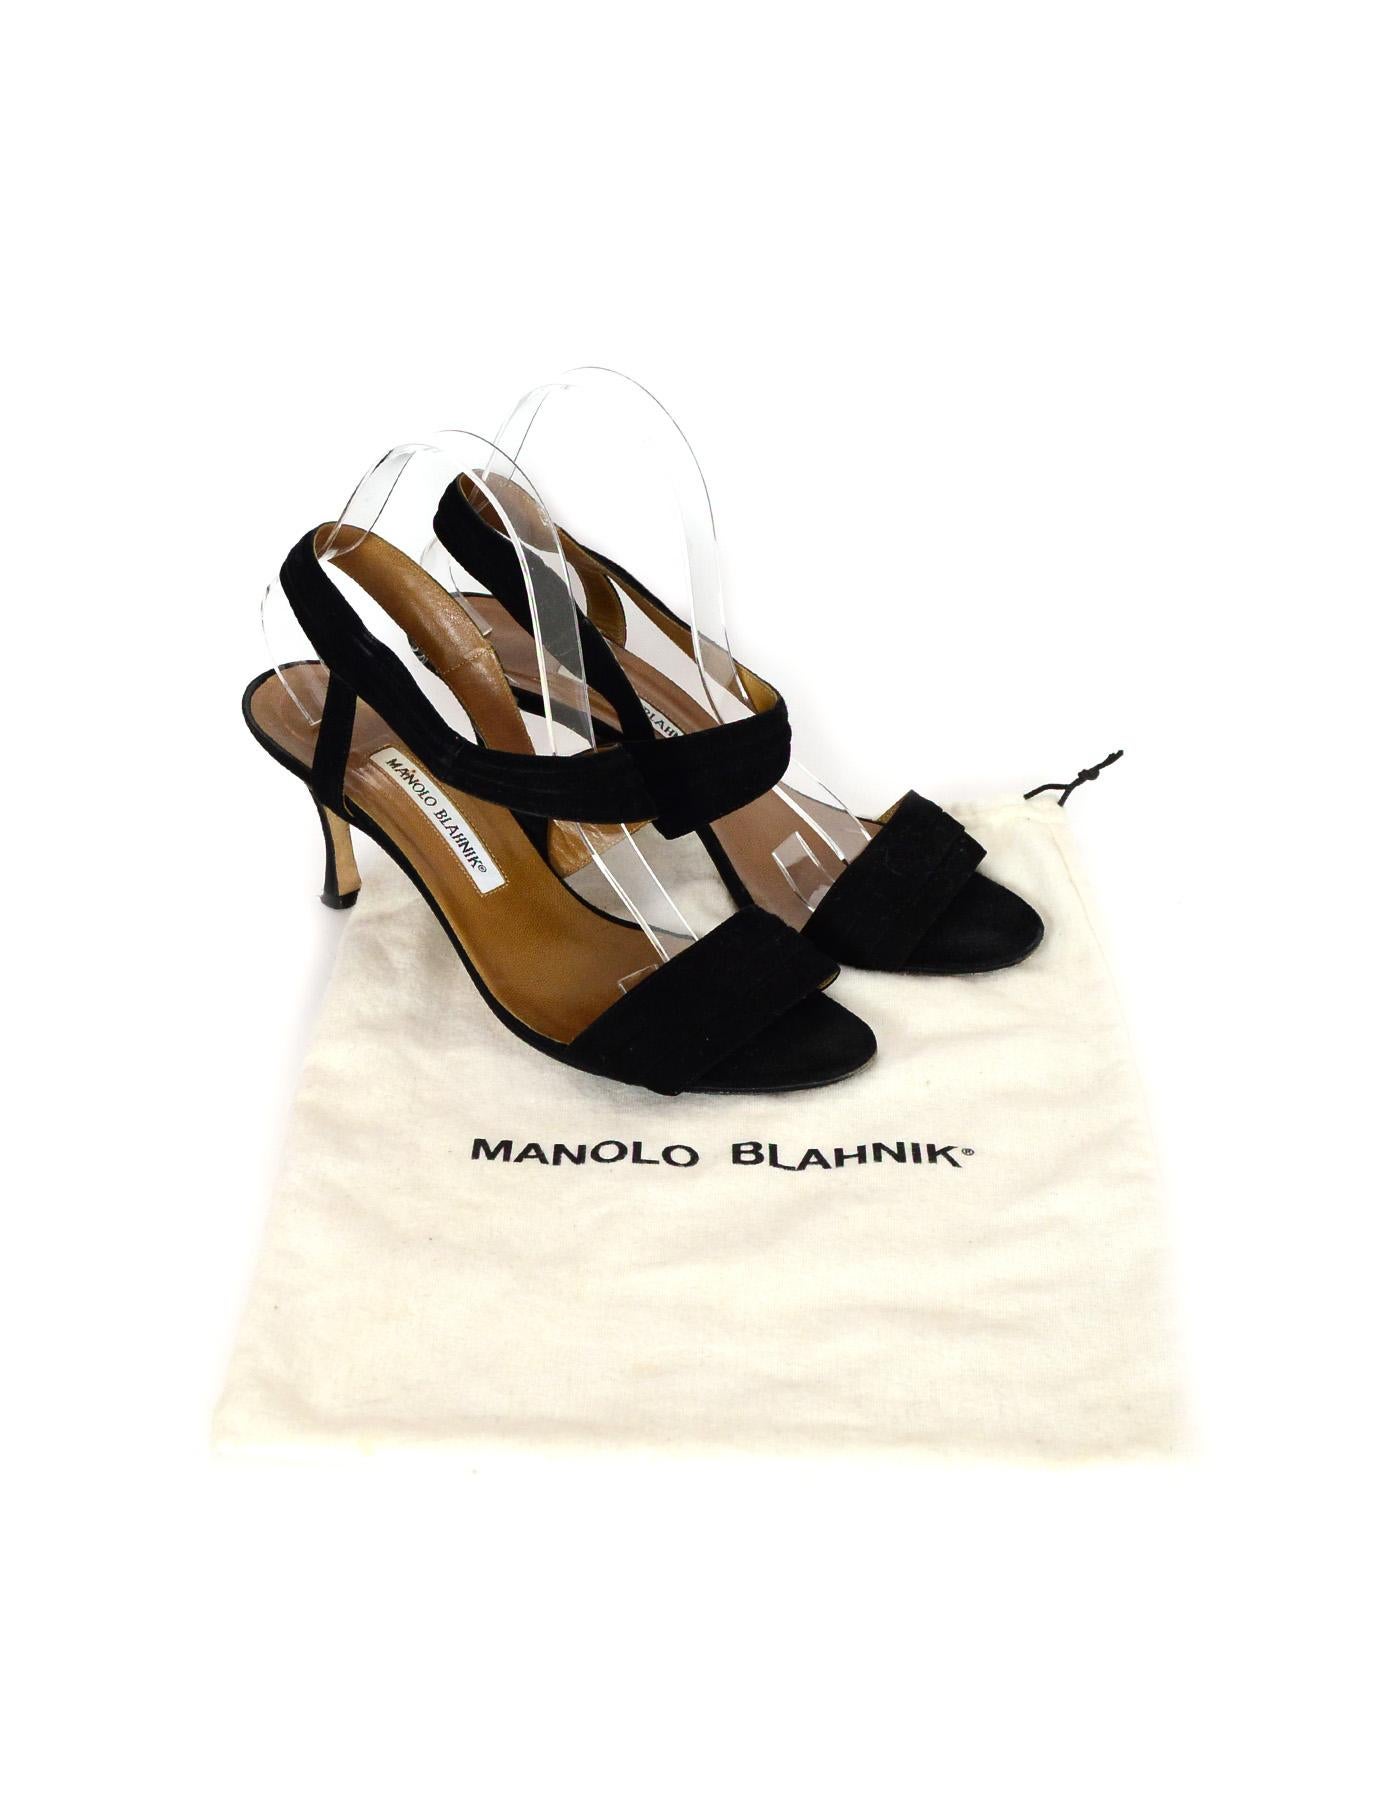 Manolo Blahnik Black Suede Ankle Strap Sandals Sz 39.5

Made In: Italy
Color: Black
Materials: Suede
Closure/Opening: Slide on
Overall Condition: Very good pre-owned condition, wear throughout suede
Includes: Dust bag

Measurements: 
Marked Size: